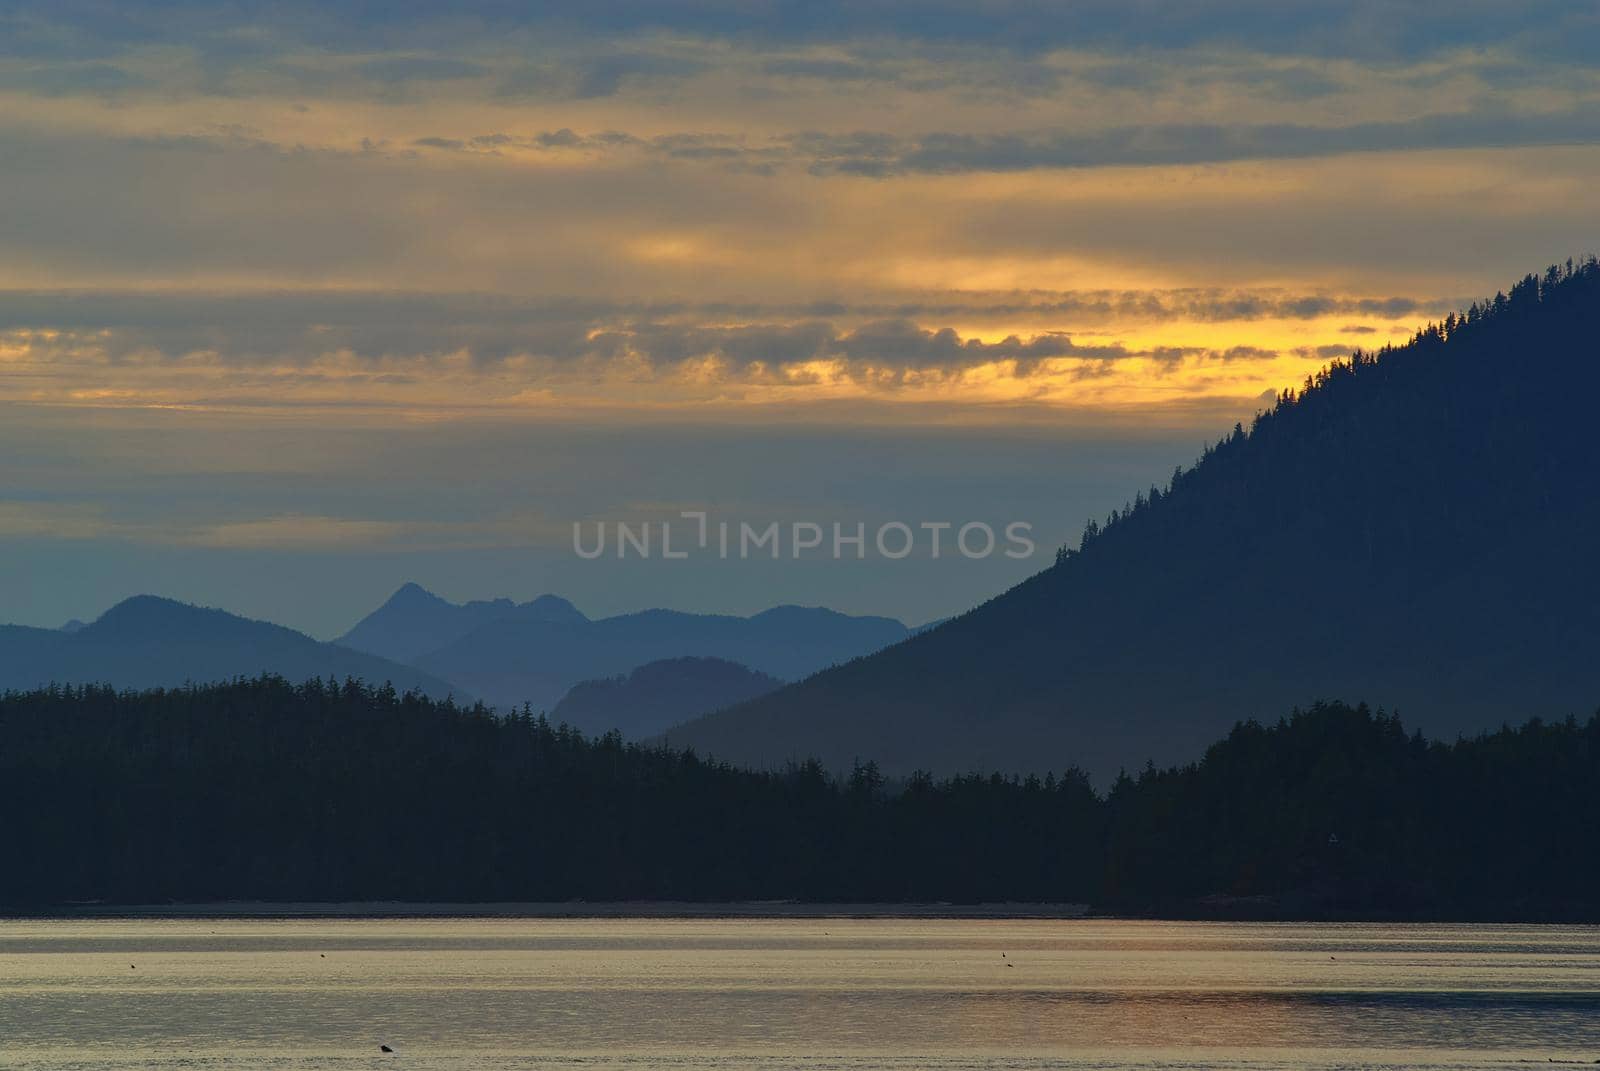 Sunset View of Mountains from Tofino on Vancouver Island in Canada. High quality photo